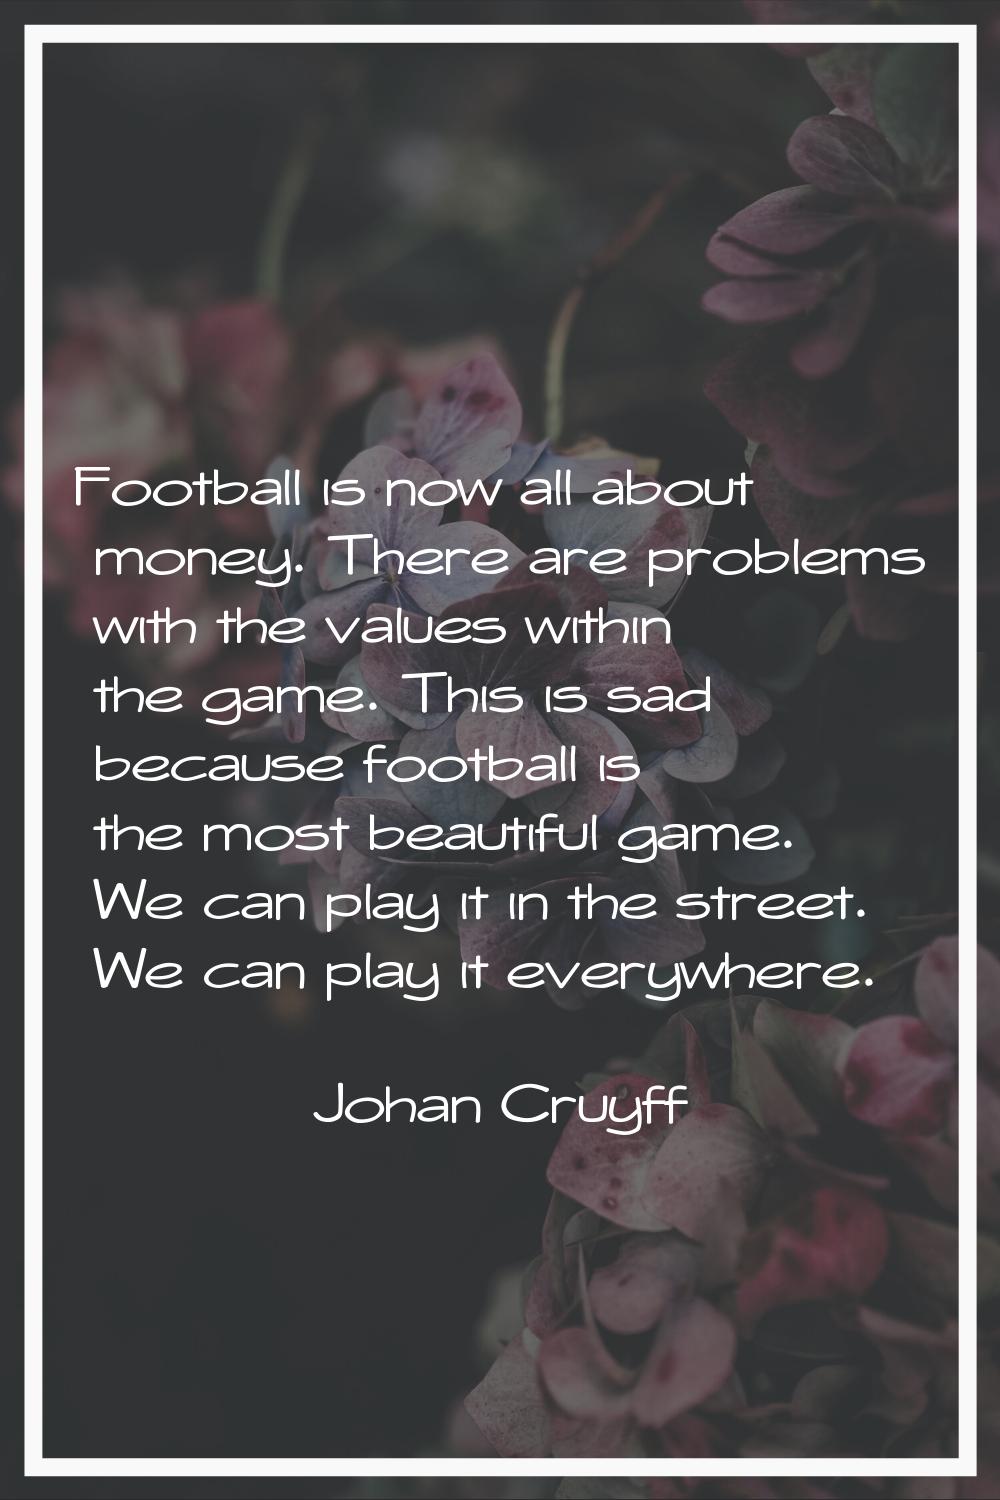 Football is now all about money. There are problems with the values within the game. This is sad be